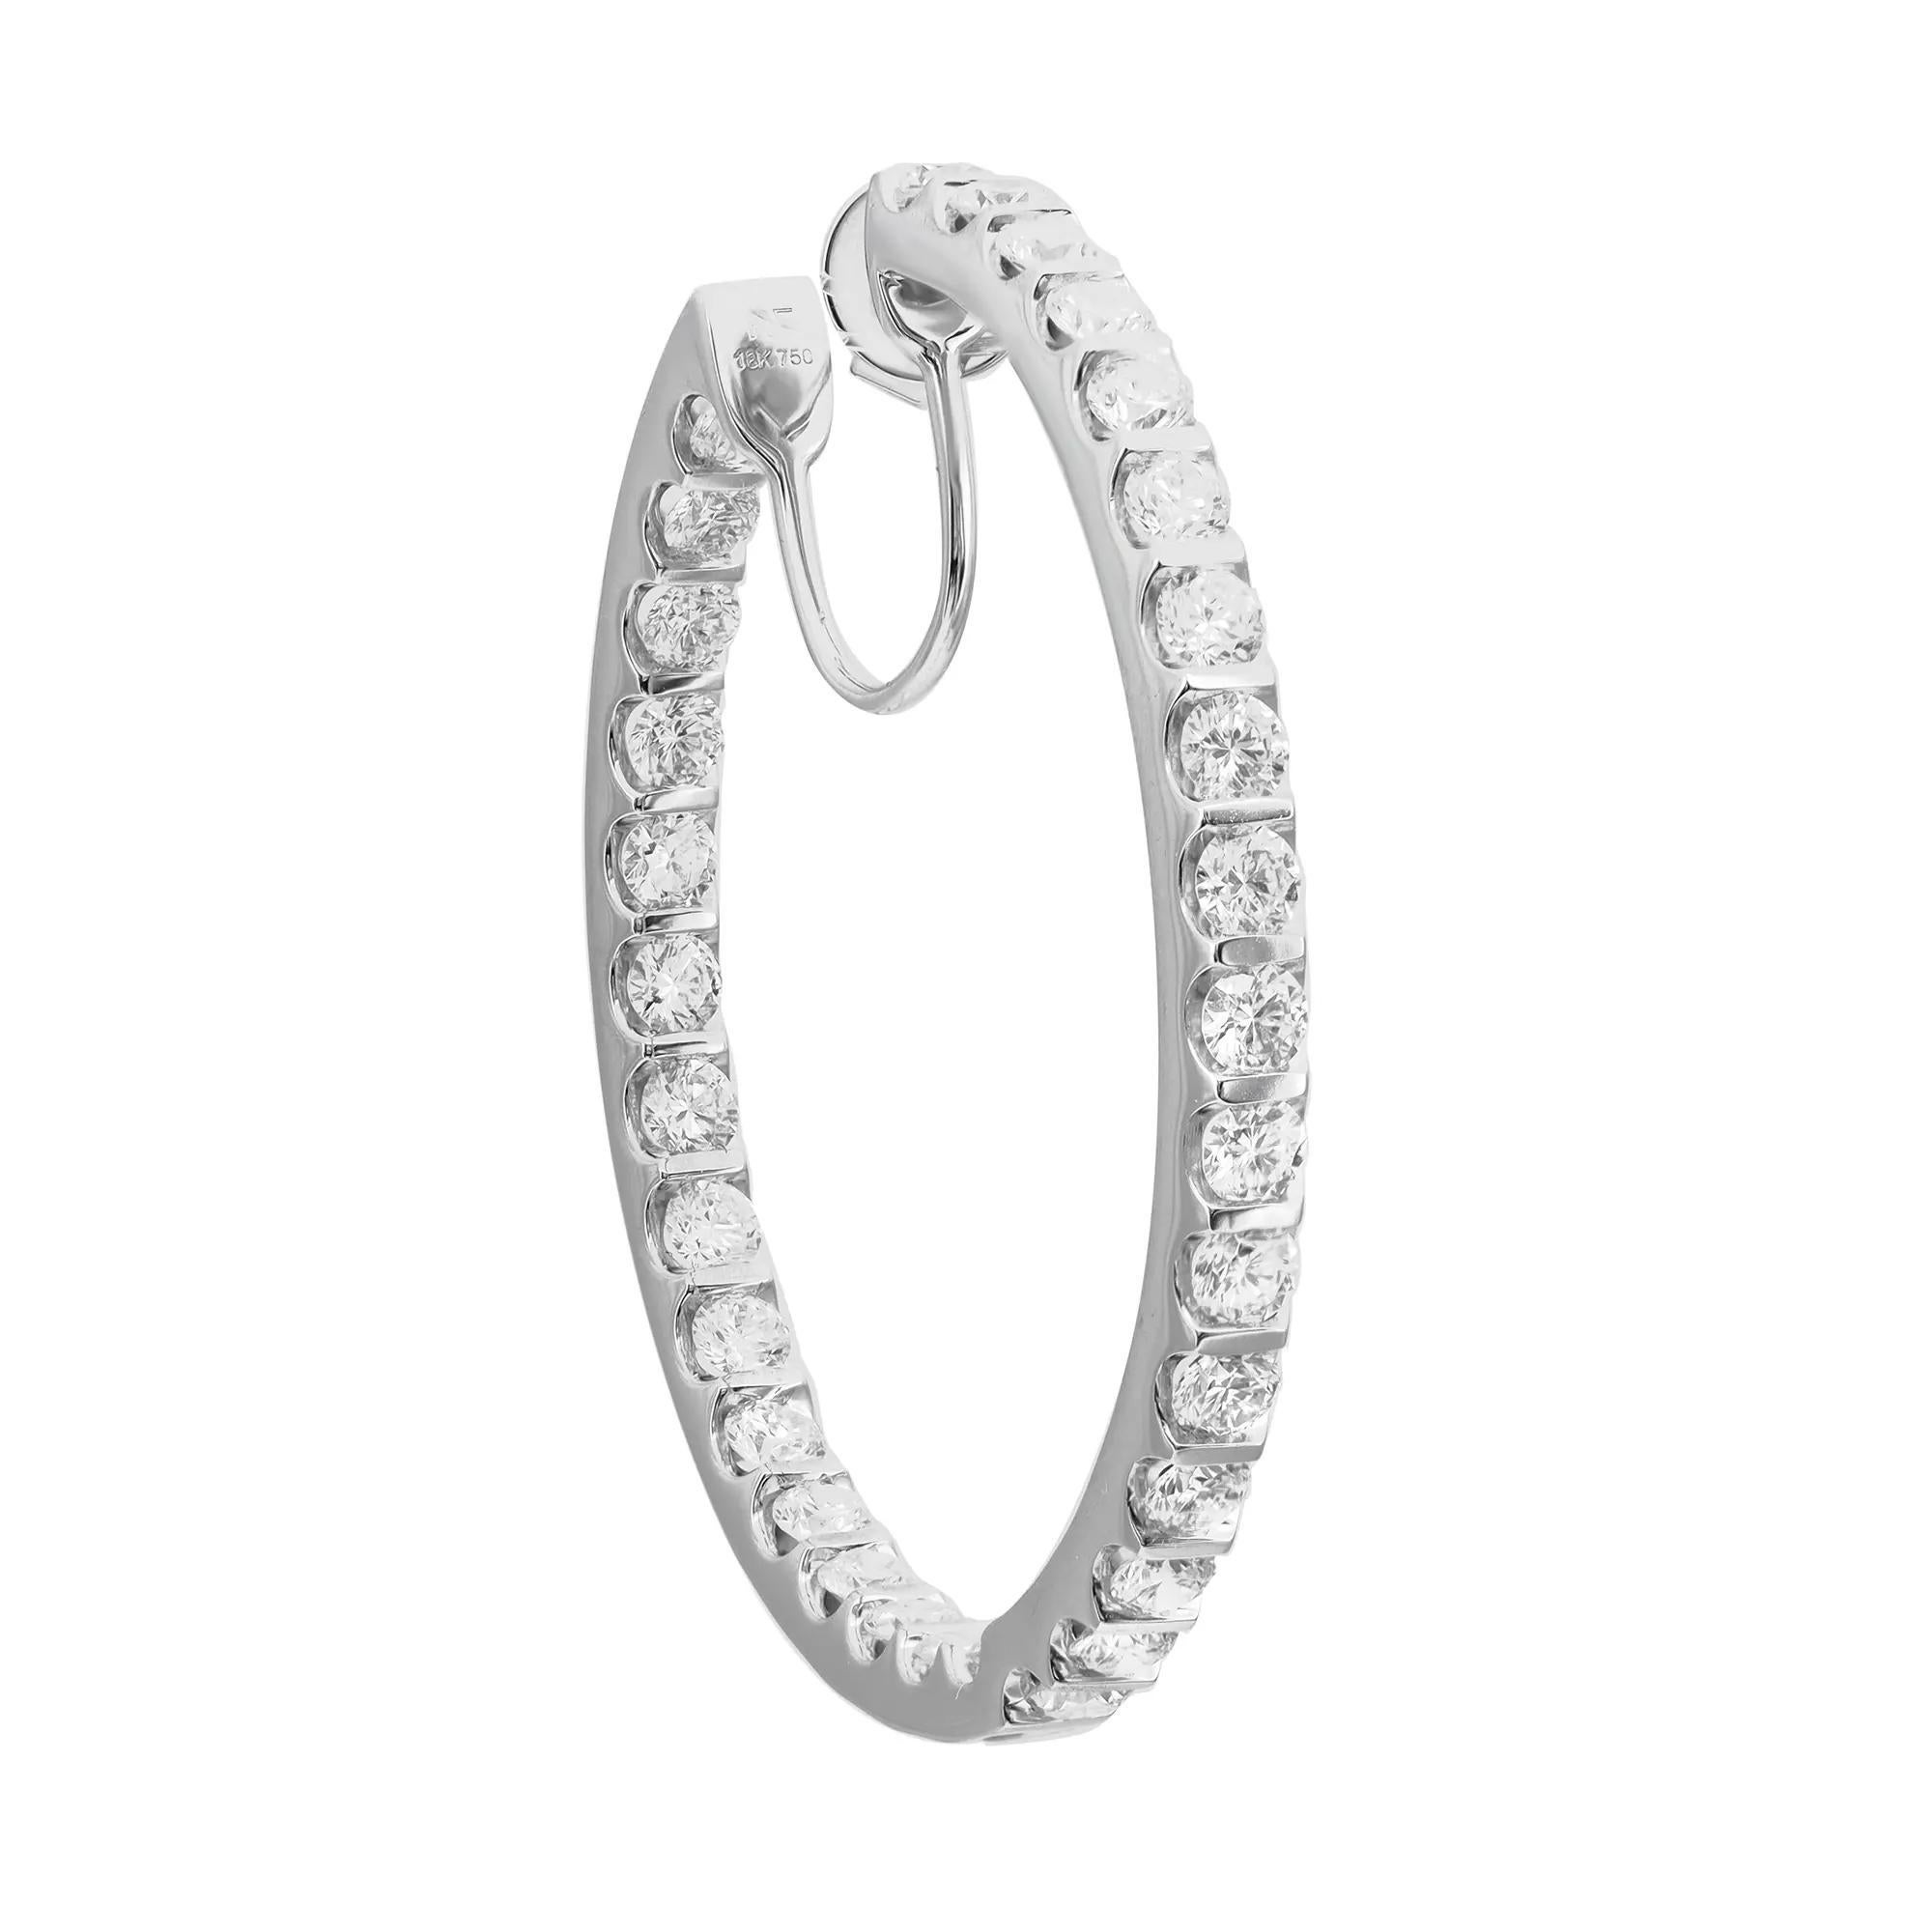 Women's Inside Out Round Cut Diamond Hoop Earrings 18K White Gold 4.76Cttw 1.5 Inches For Sale